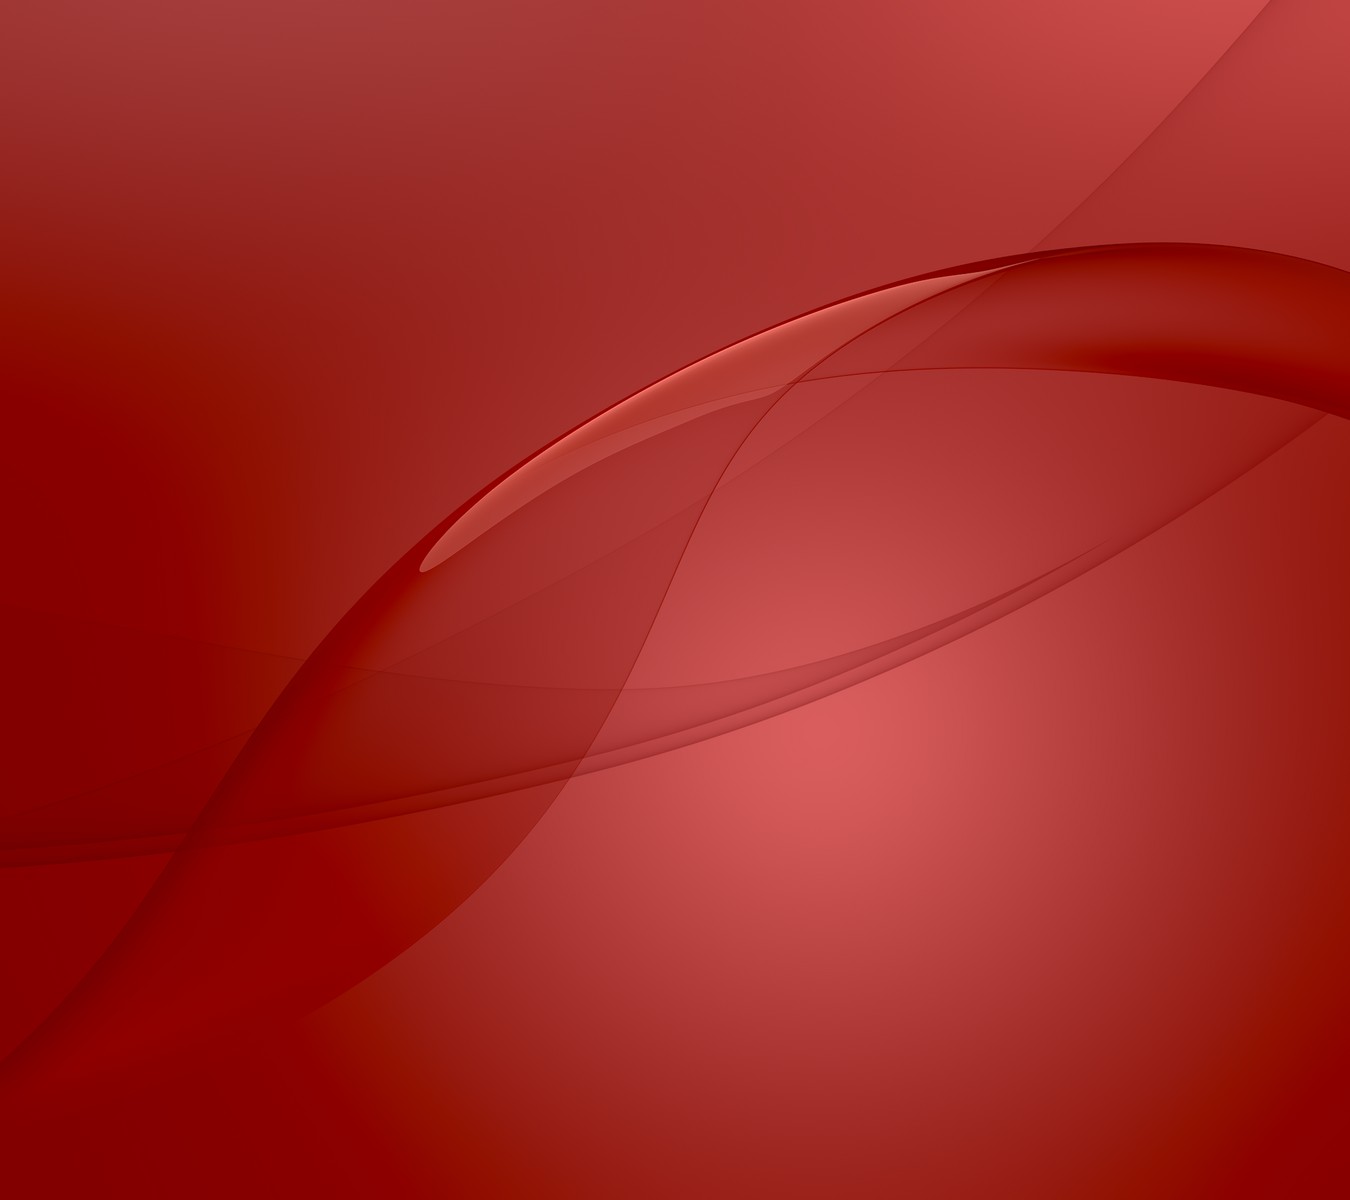 40 Sony Xperia Wallpapers Download On Wallpapersafari